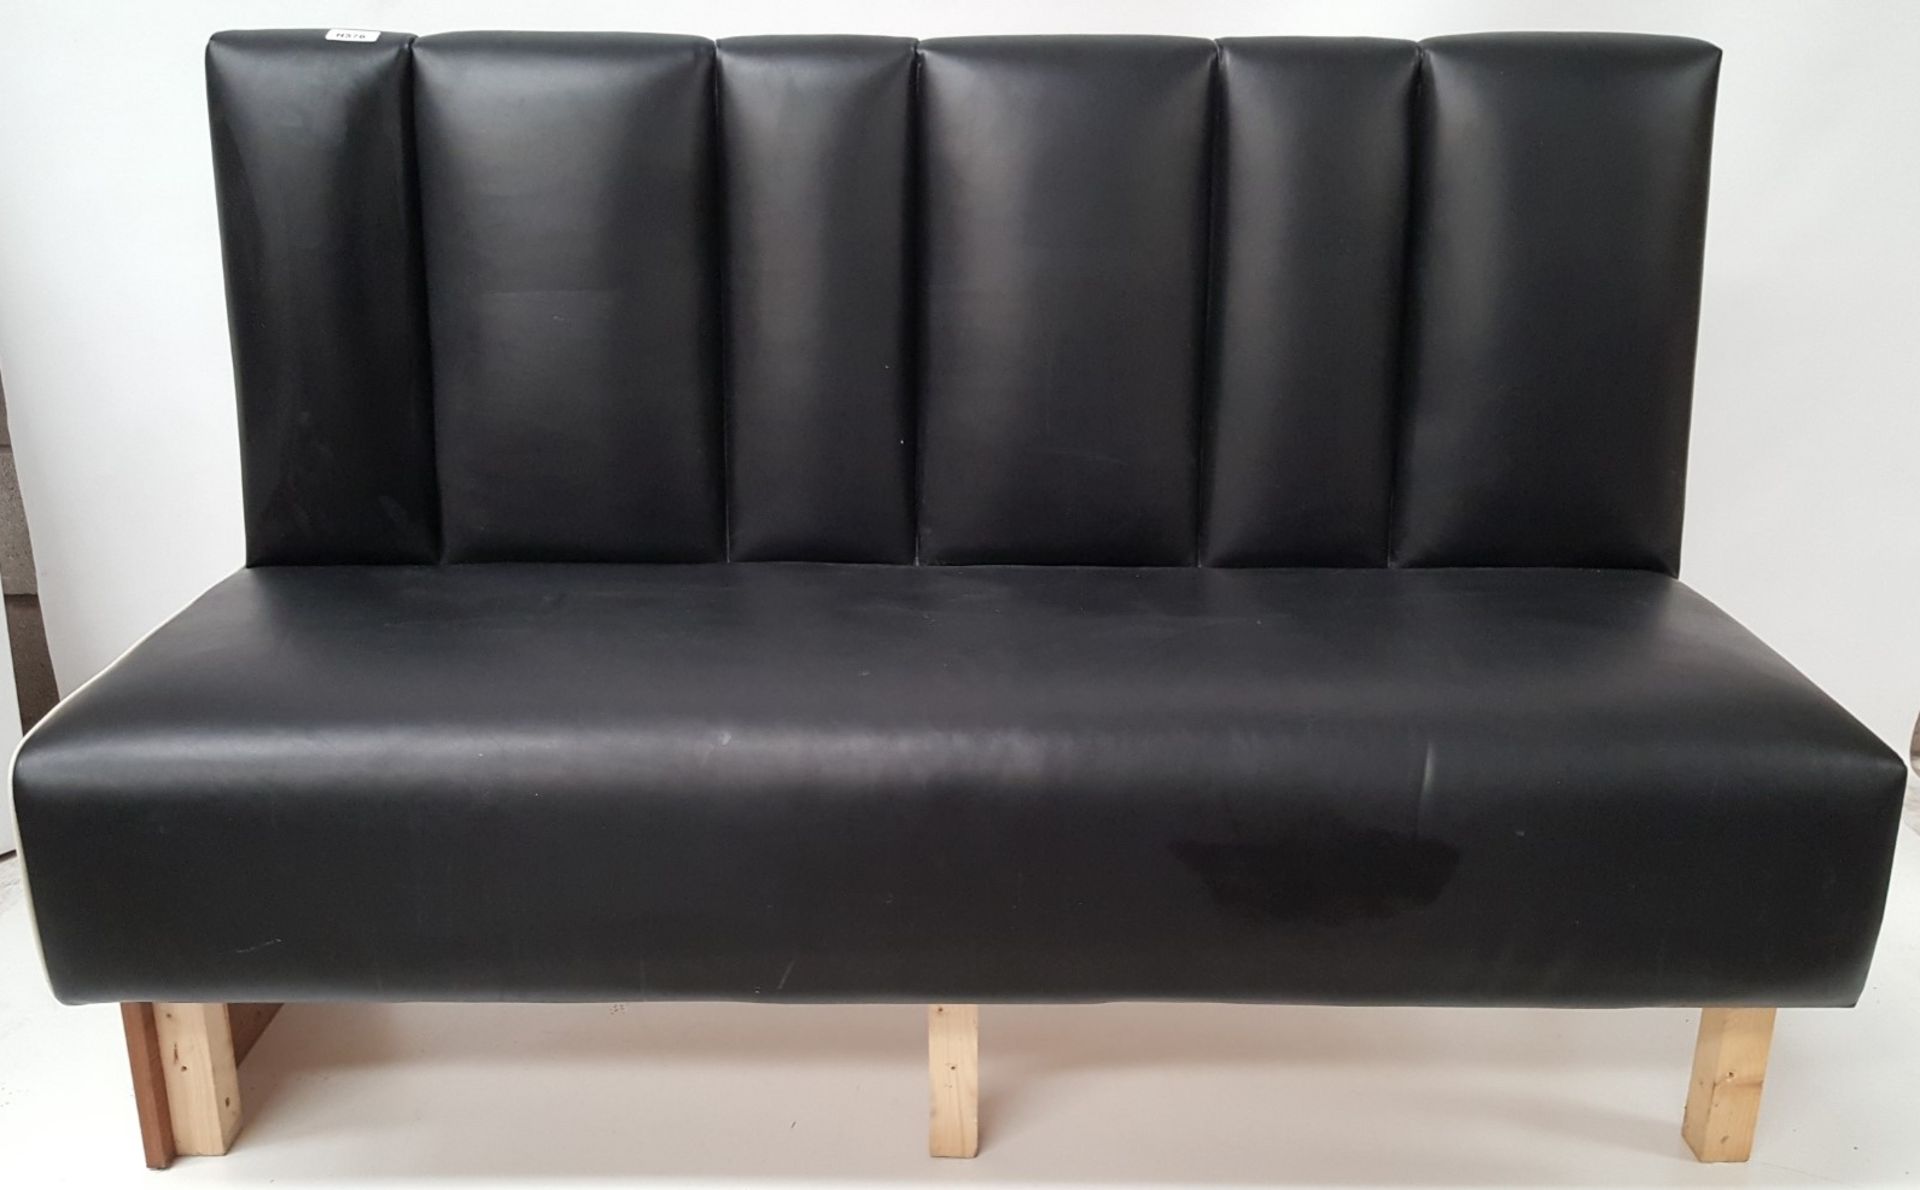 3 Pieces Of Black Upholstered Faux Leather Seating Booths - CL431 - Location: Altrincham WA14 - Image 18 of 19